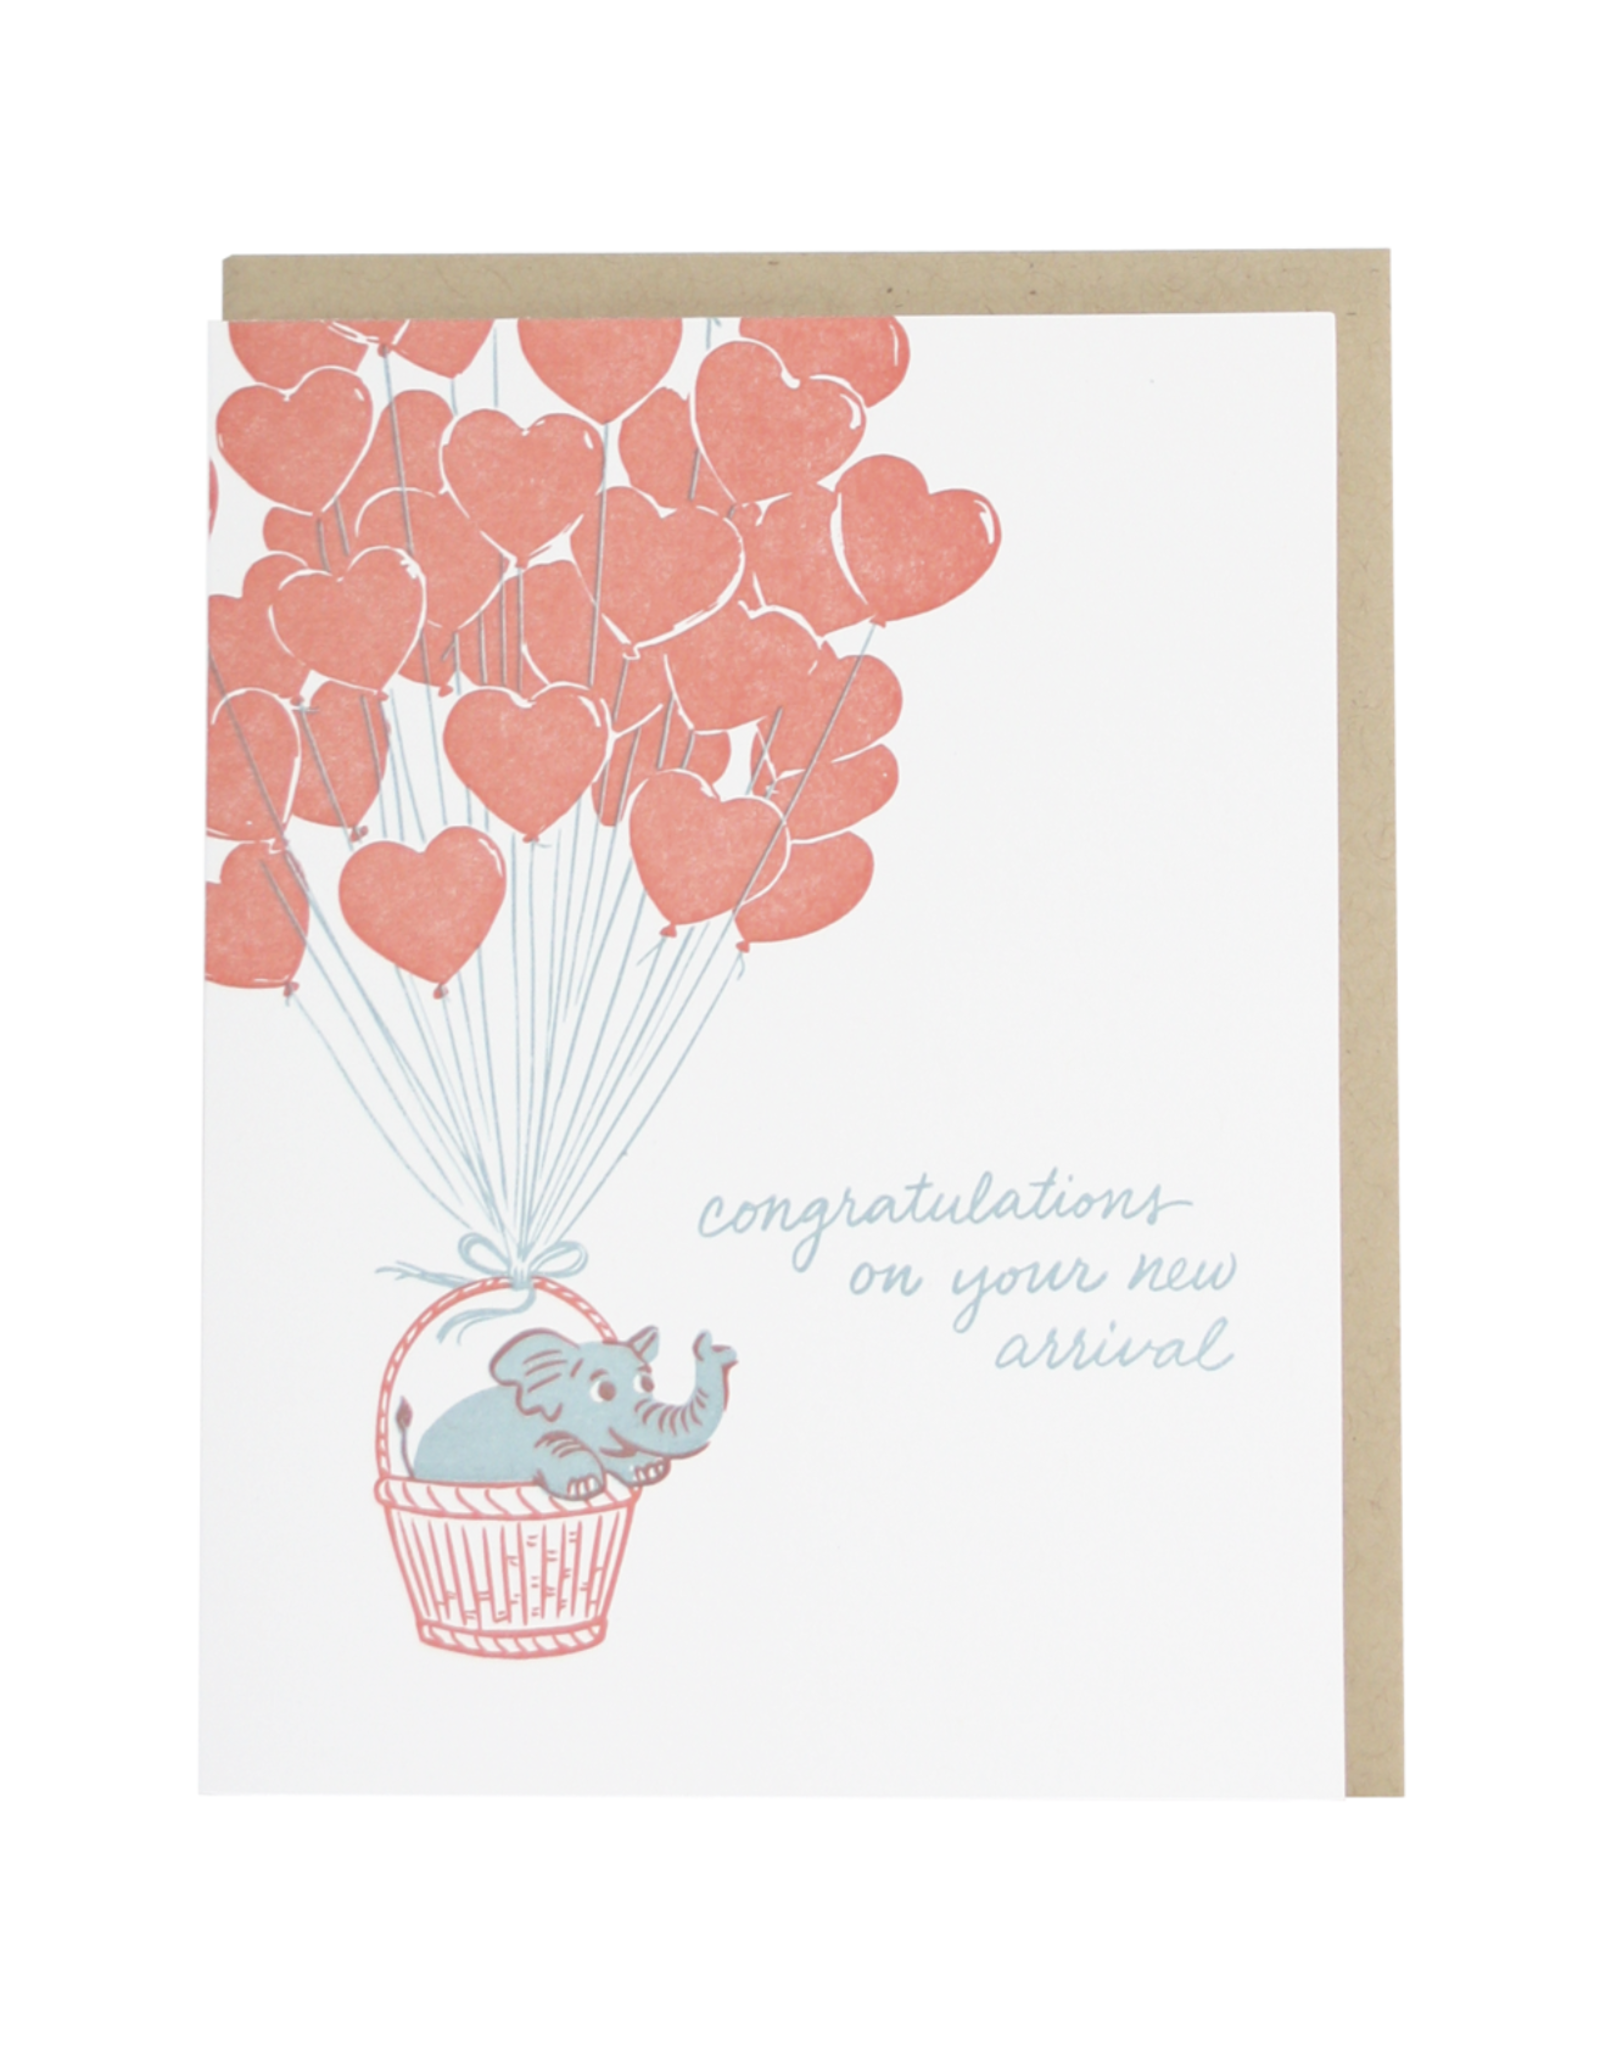 Elephant and Balloons Card